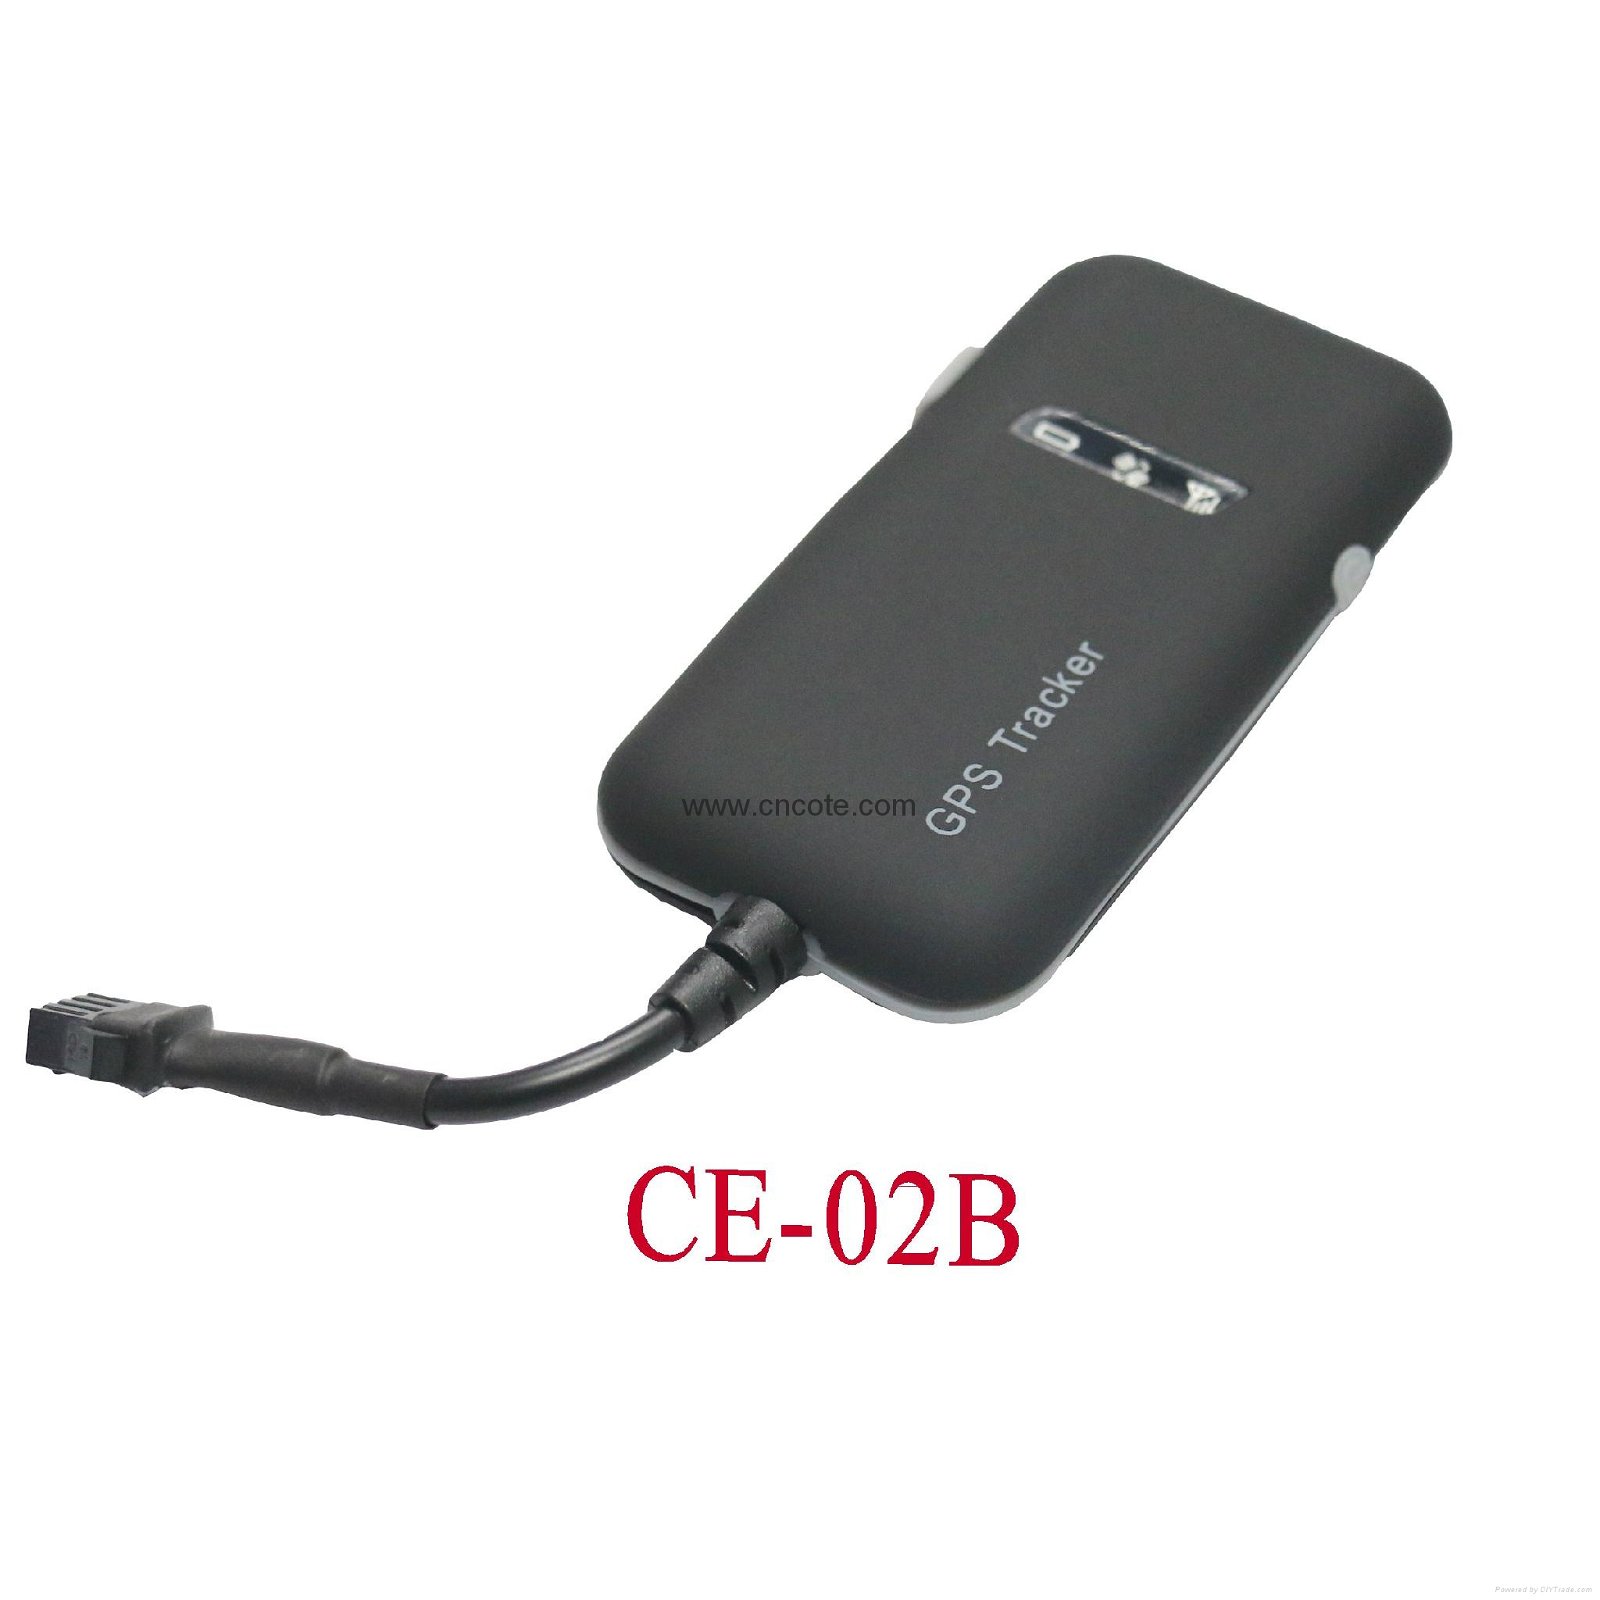 Alarmerend erwt hoorbaar Vehicle GPS tracker Chinese factory good price GPS tracking device - CE-02  - CNCOTE (China Manufacturer) - Car Safety Products - Car